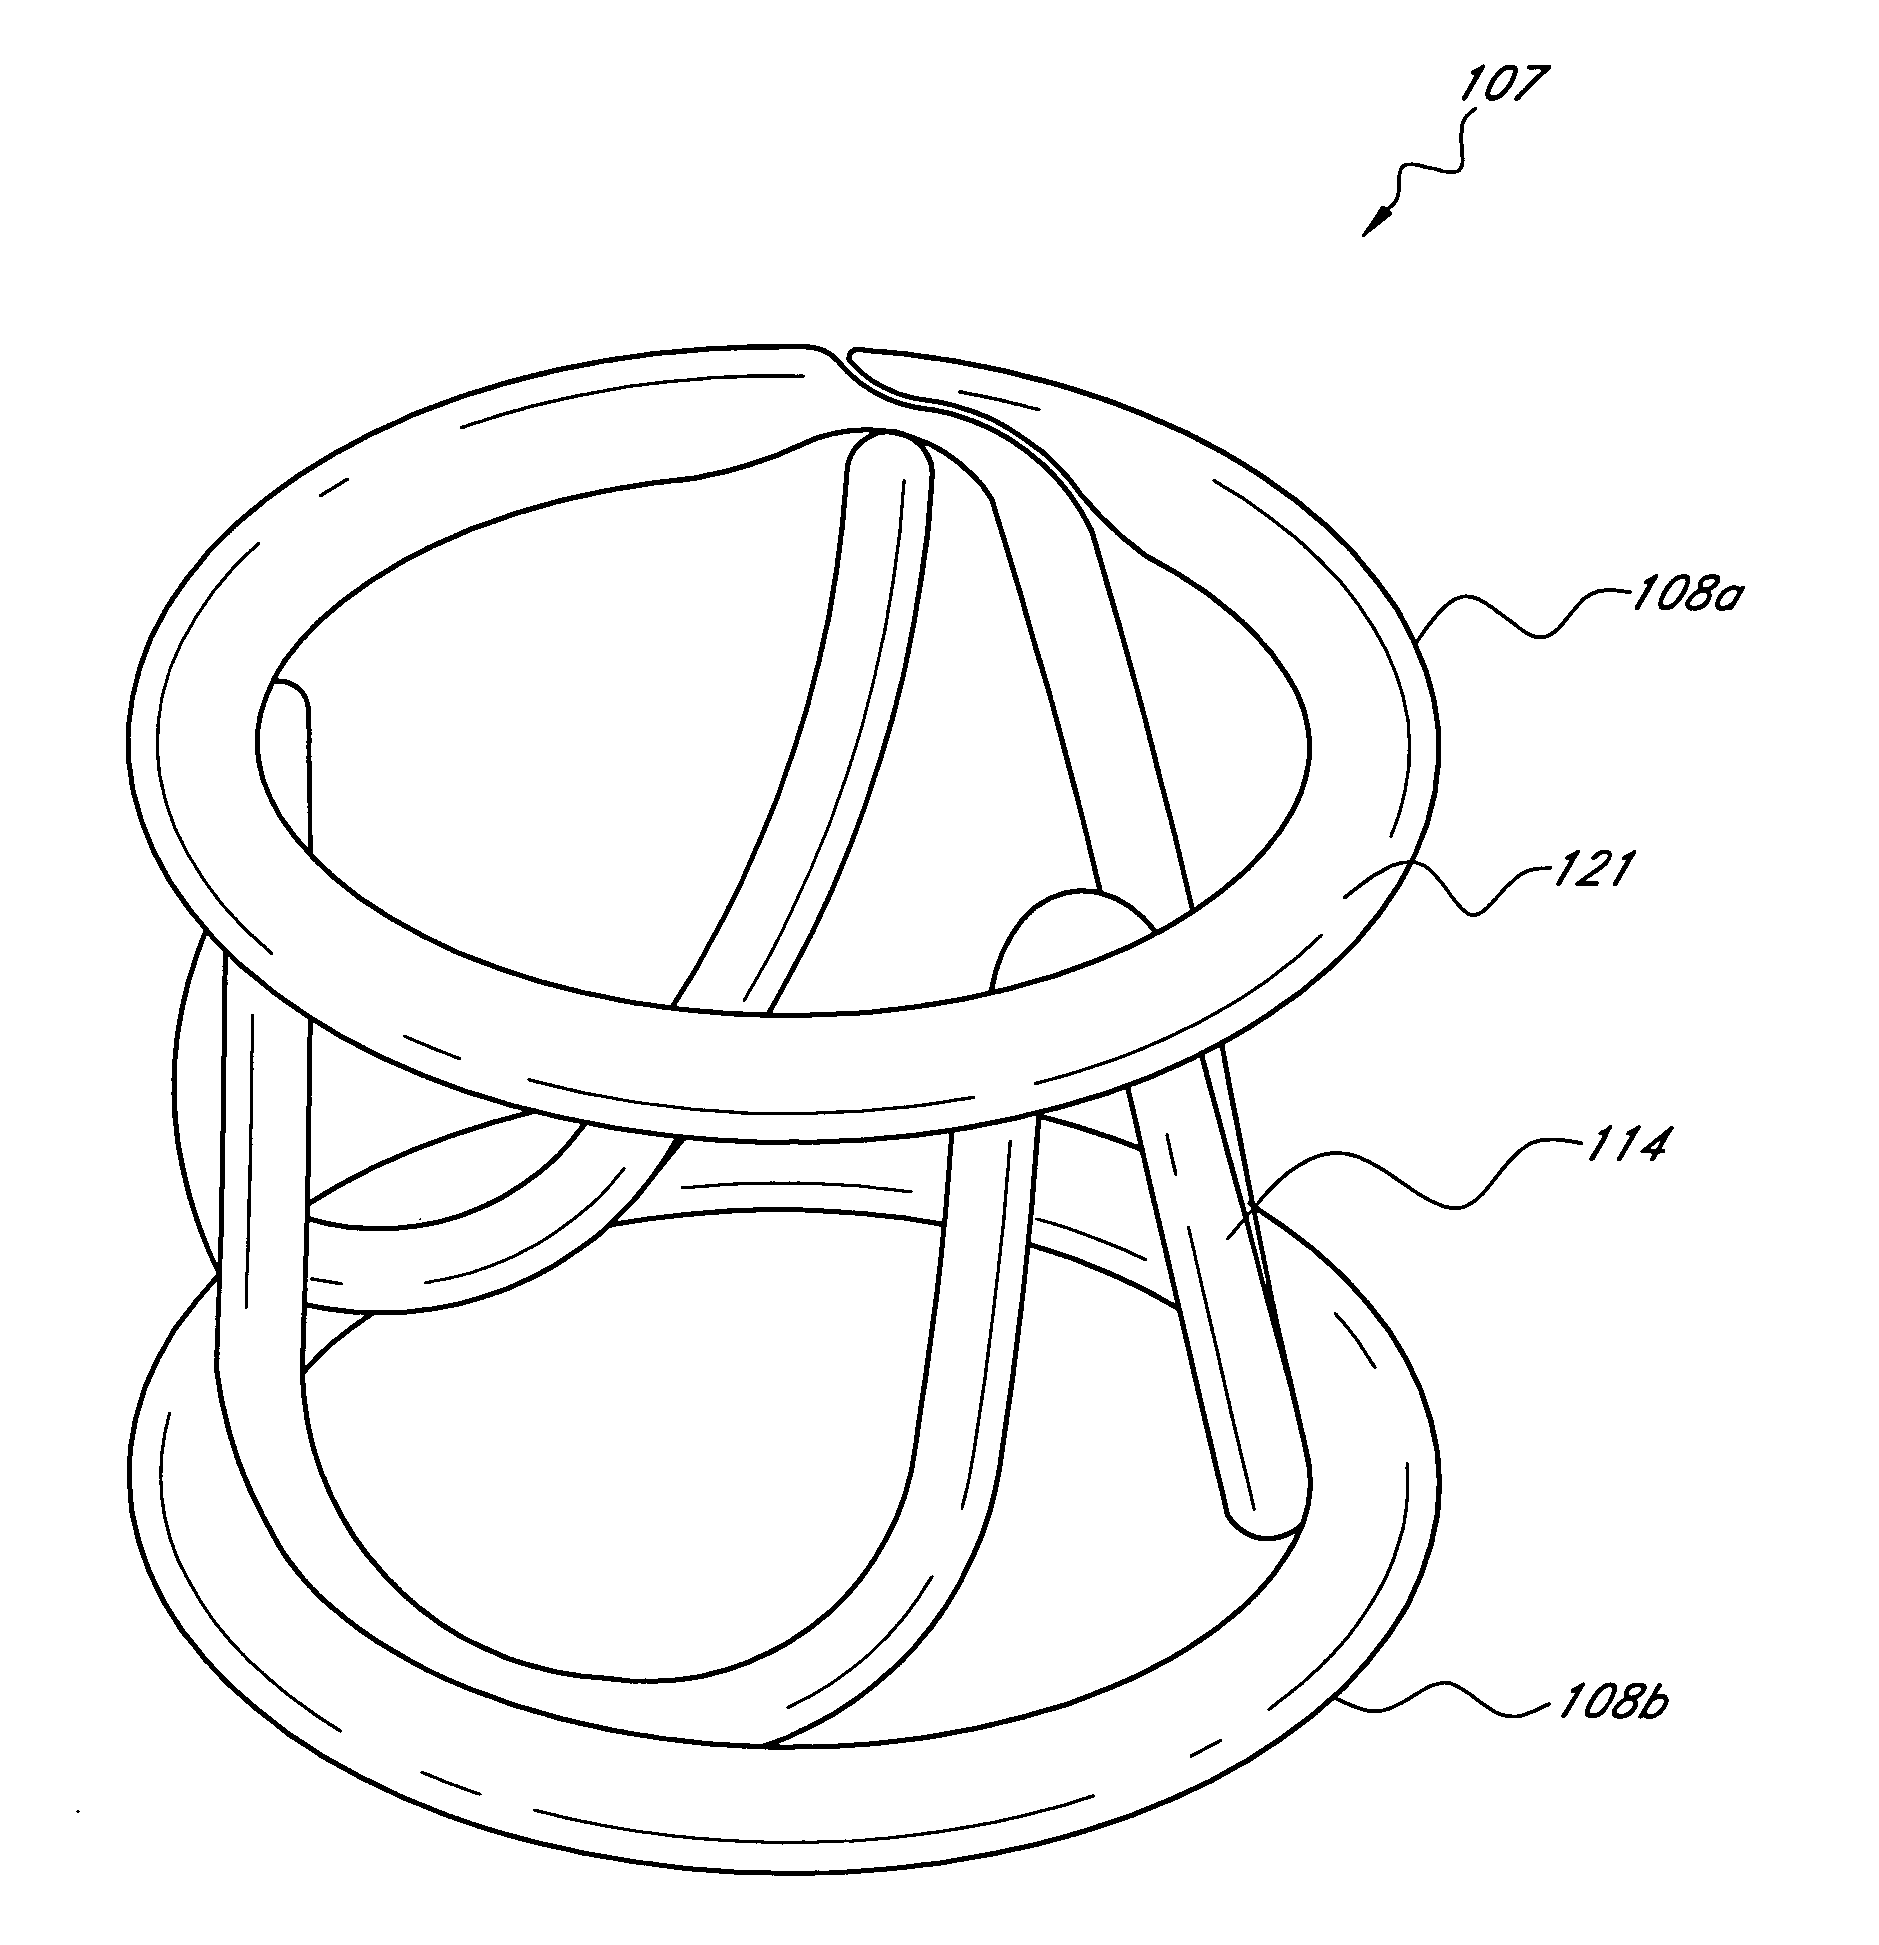 Nonstented temporary valve for cardiovascular therapy